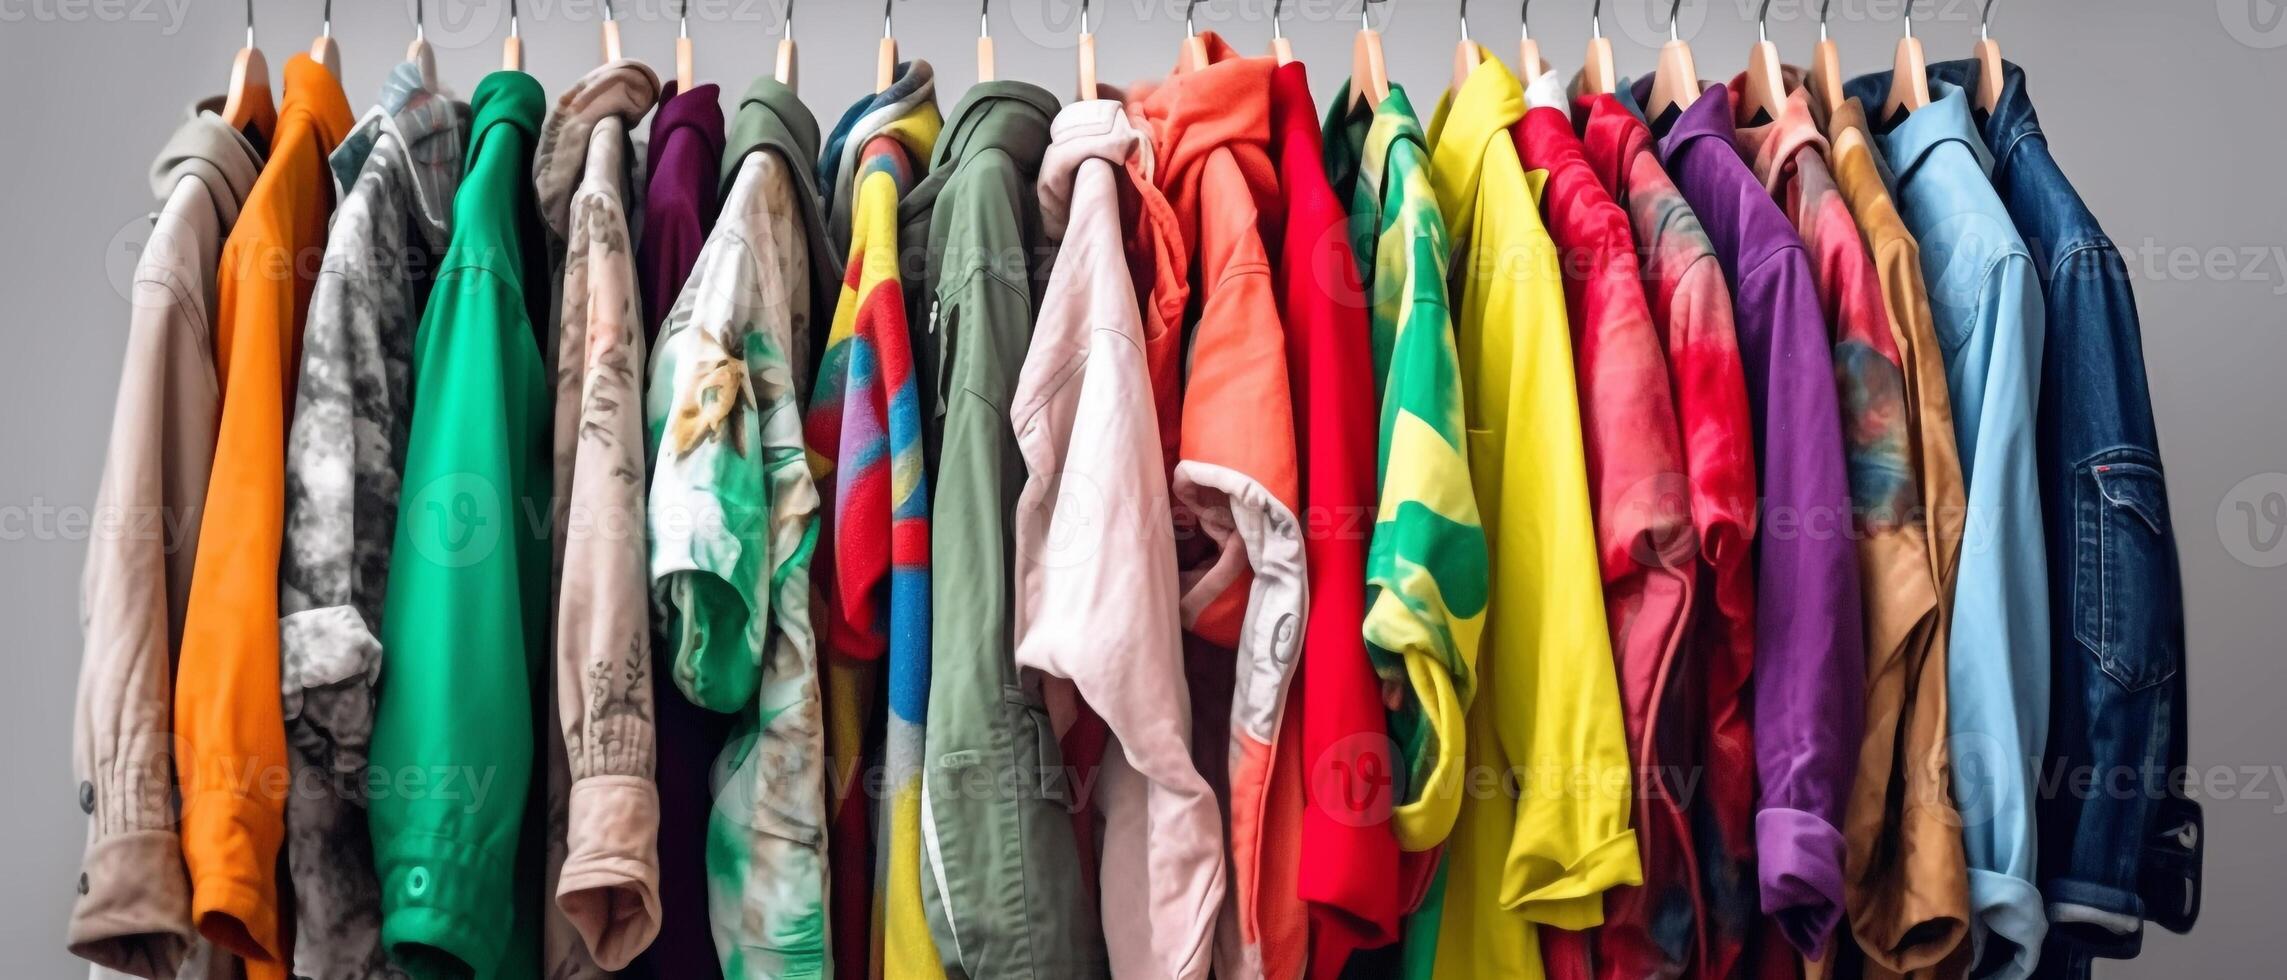 Fashion clothes on clothing rack - bright colorful closet. Closeup of rainbow color choice of trendy female wear on hangers in store closet or spring cleaning concept. Summer home wardrobe. photo